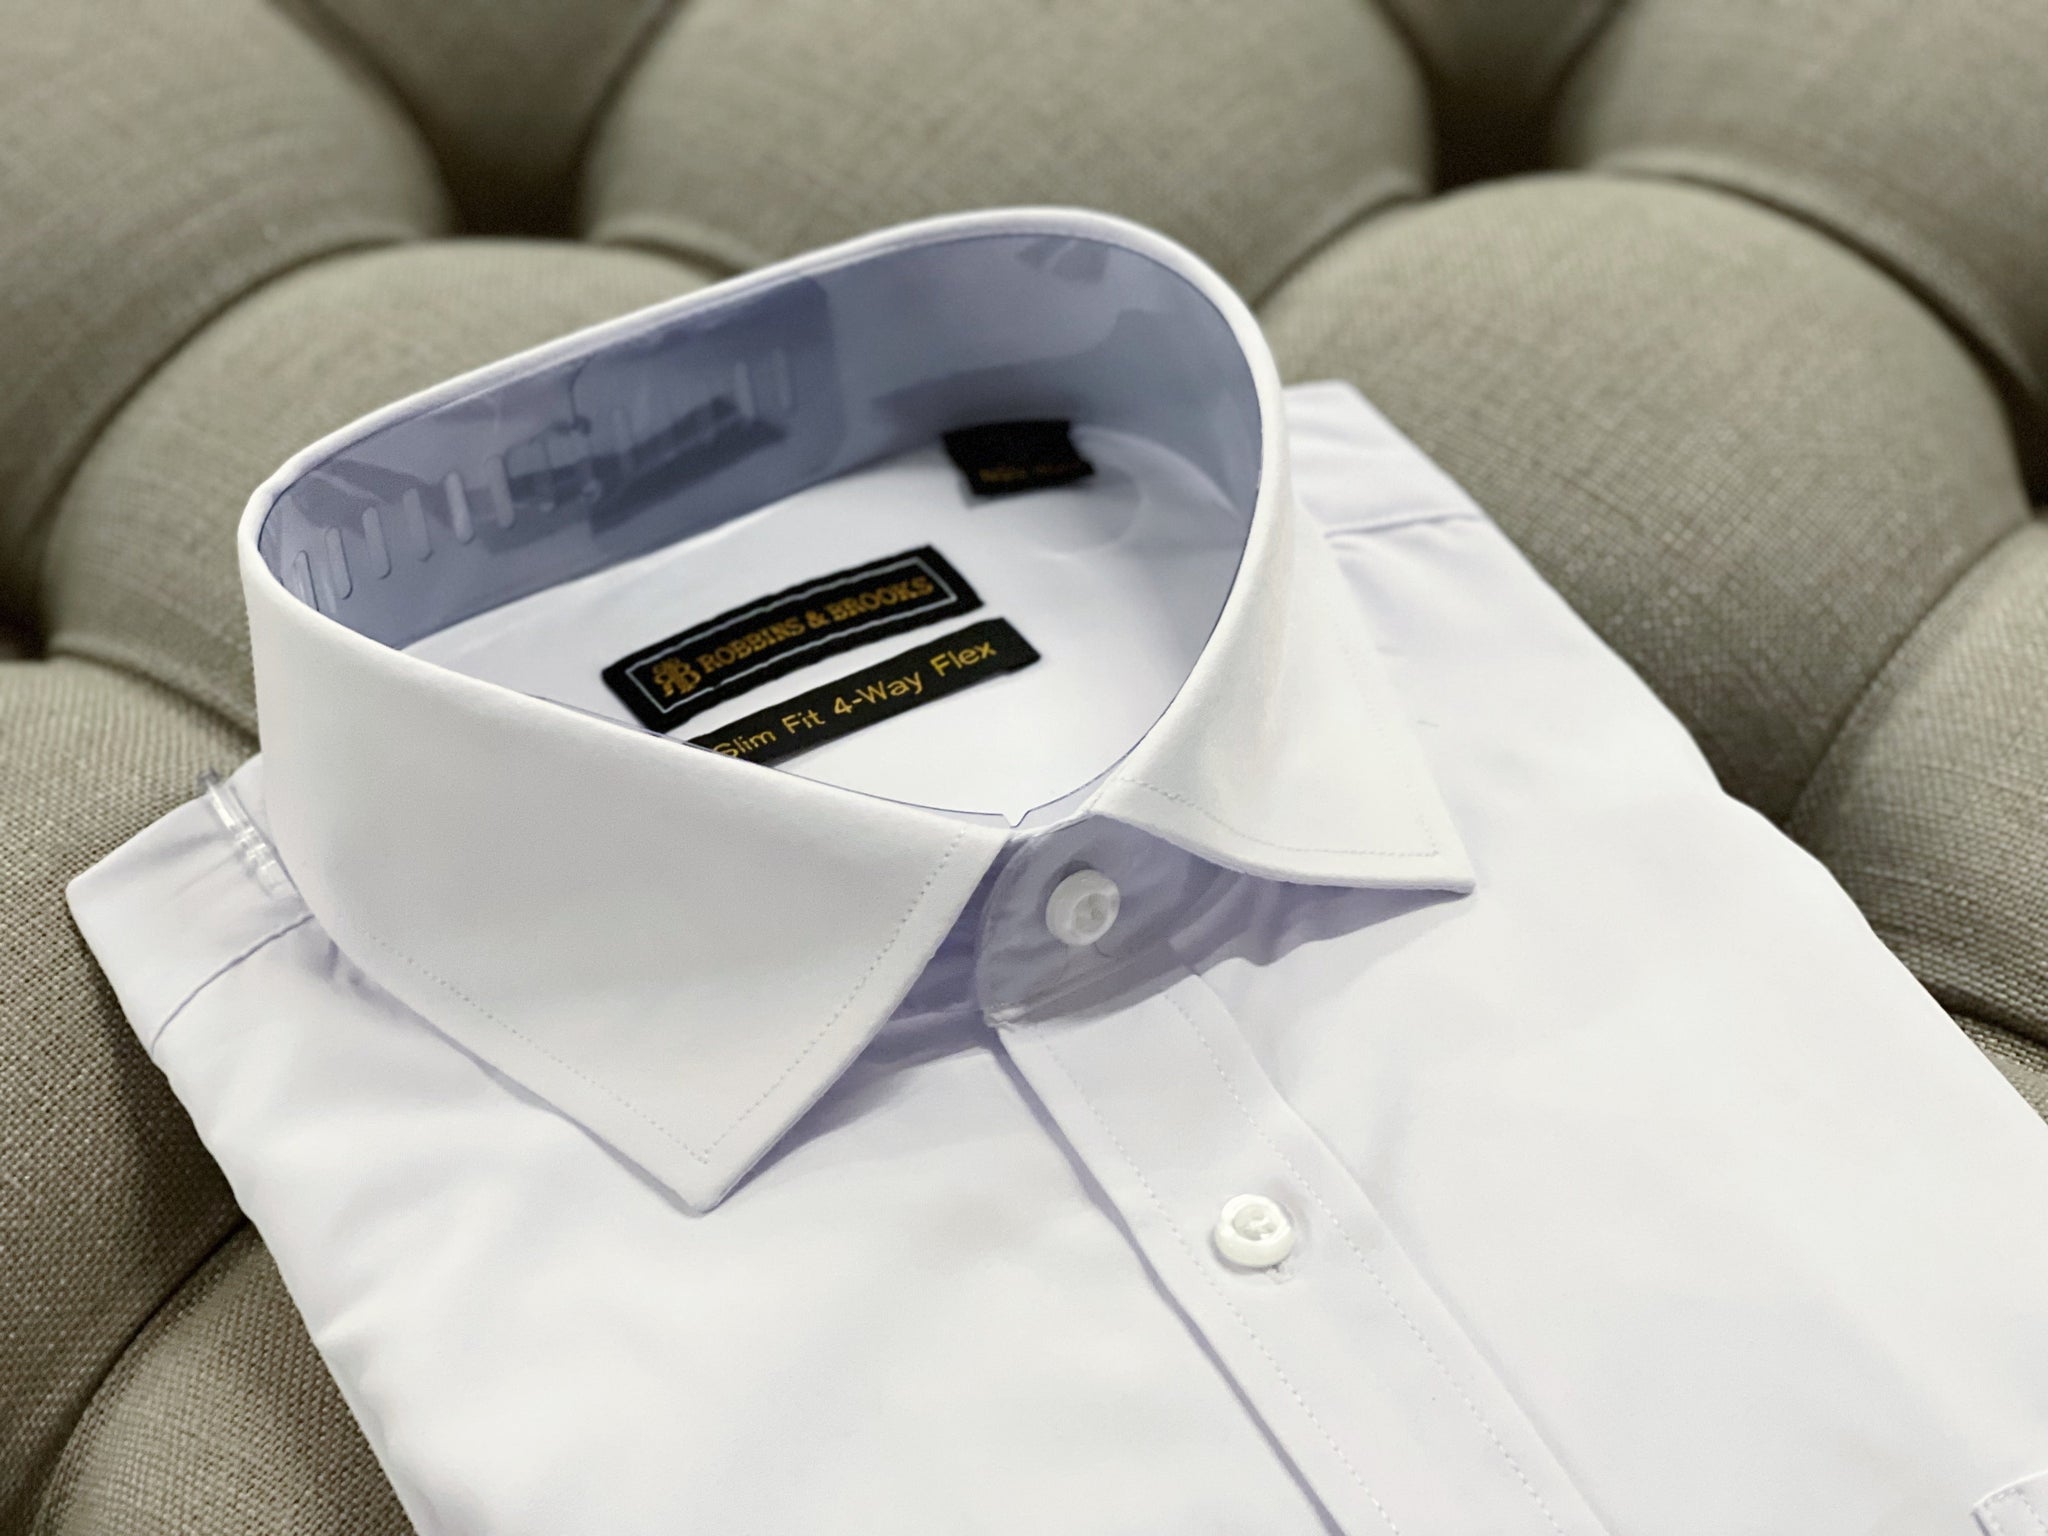 White Tapered Fit Shirt - Muscle Fit White Shirt